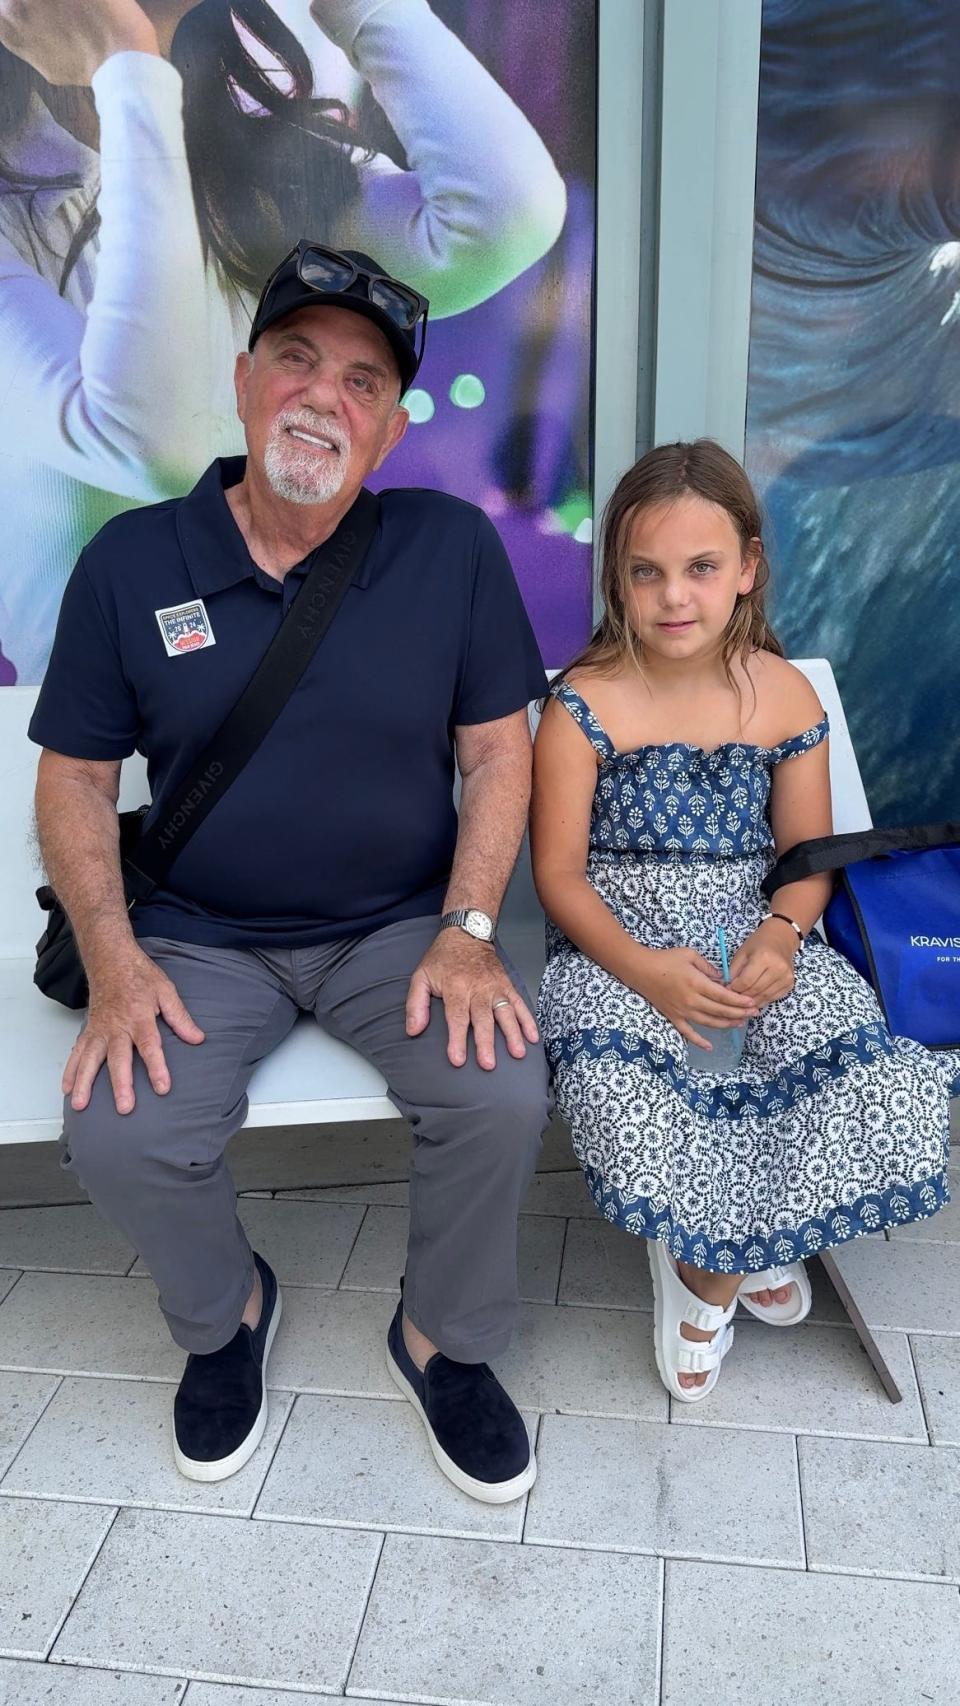 Rocker and part-time Palm Beach County resident Billy Joel and his daughter Della Rose, 8, on June 5 attended a showing of "Space Explorers: The Infinite" at the Kravis Center for the Performing Arts in West Palm Beach.